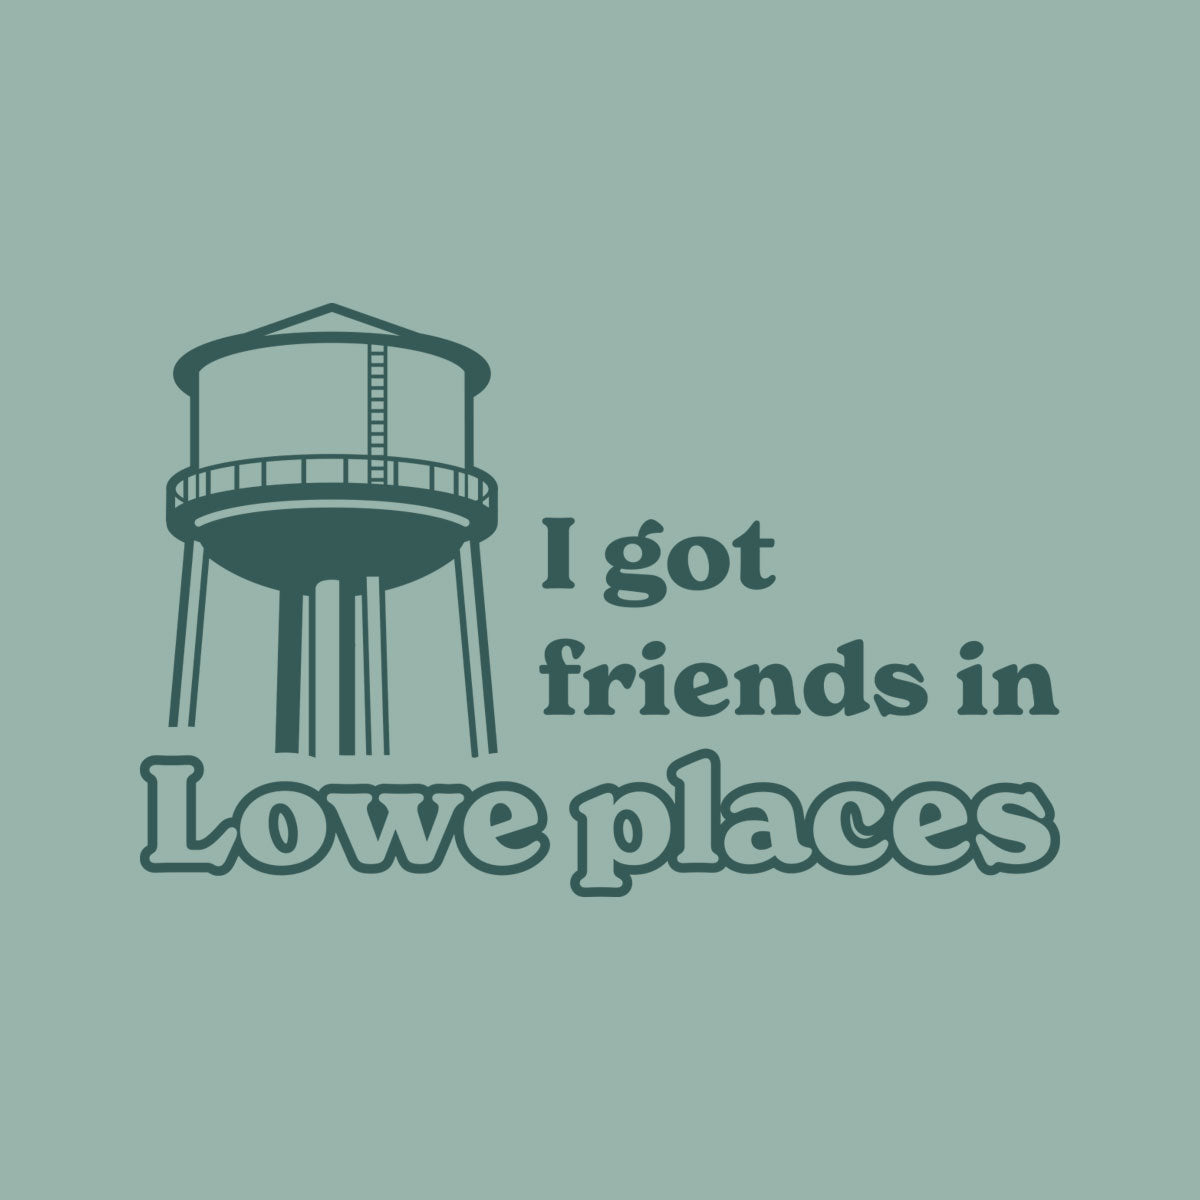 Thumbnail of water tower with text "I got friends in Lowe places" on light green background